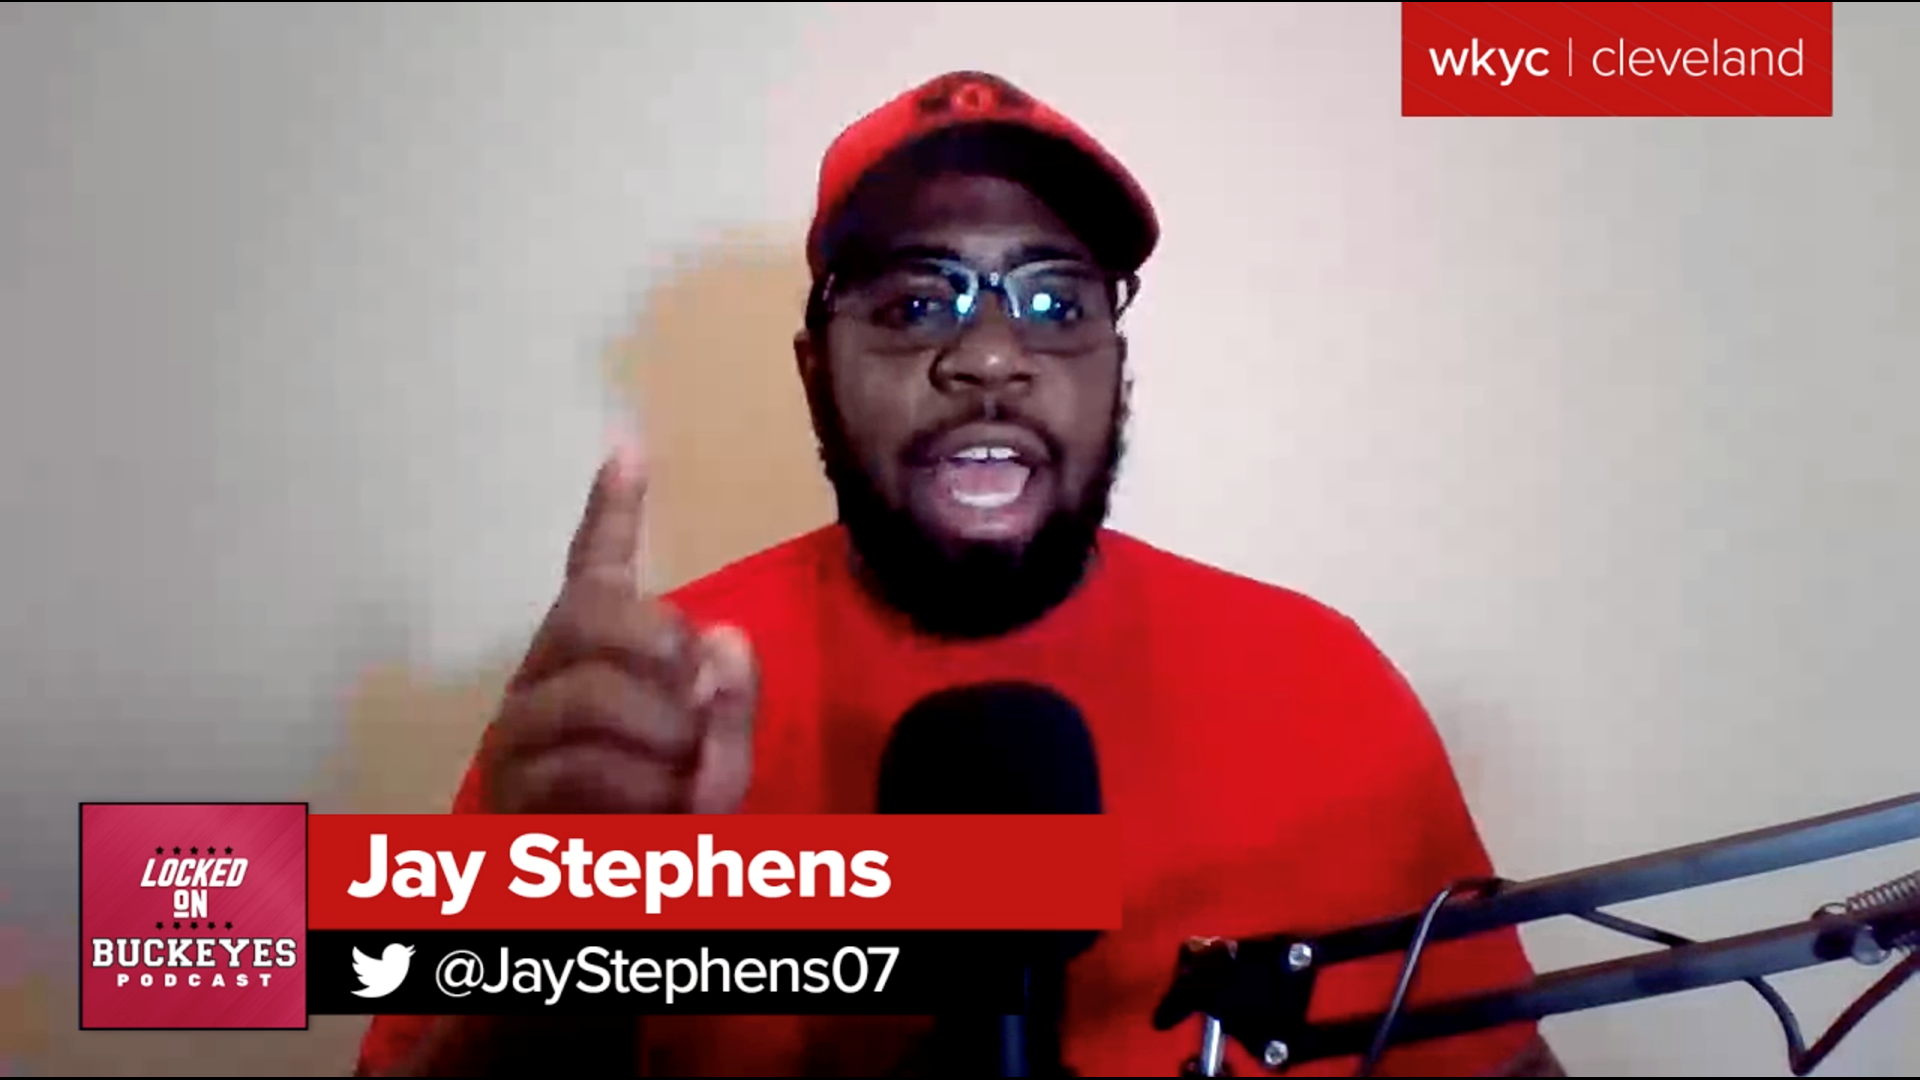 Jay Stephens breaks down an impressive road win in what was perhaps the best college basketball game of the season.